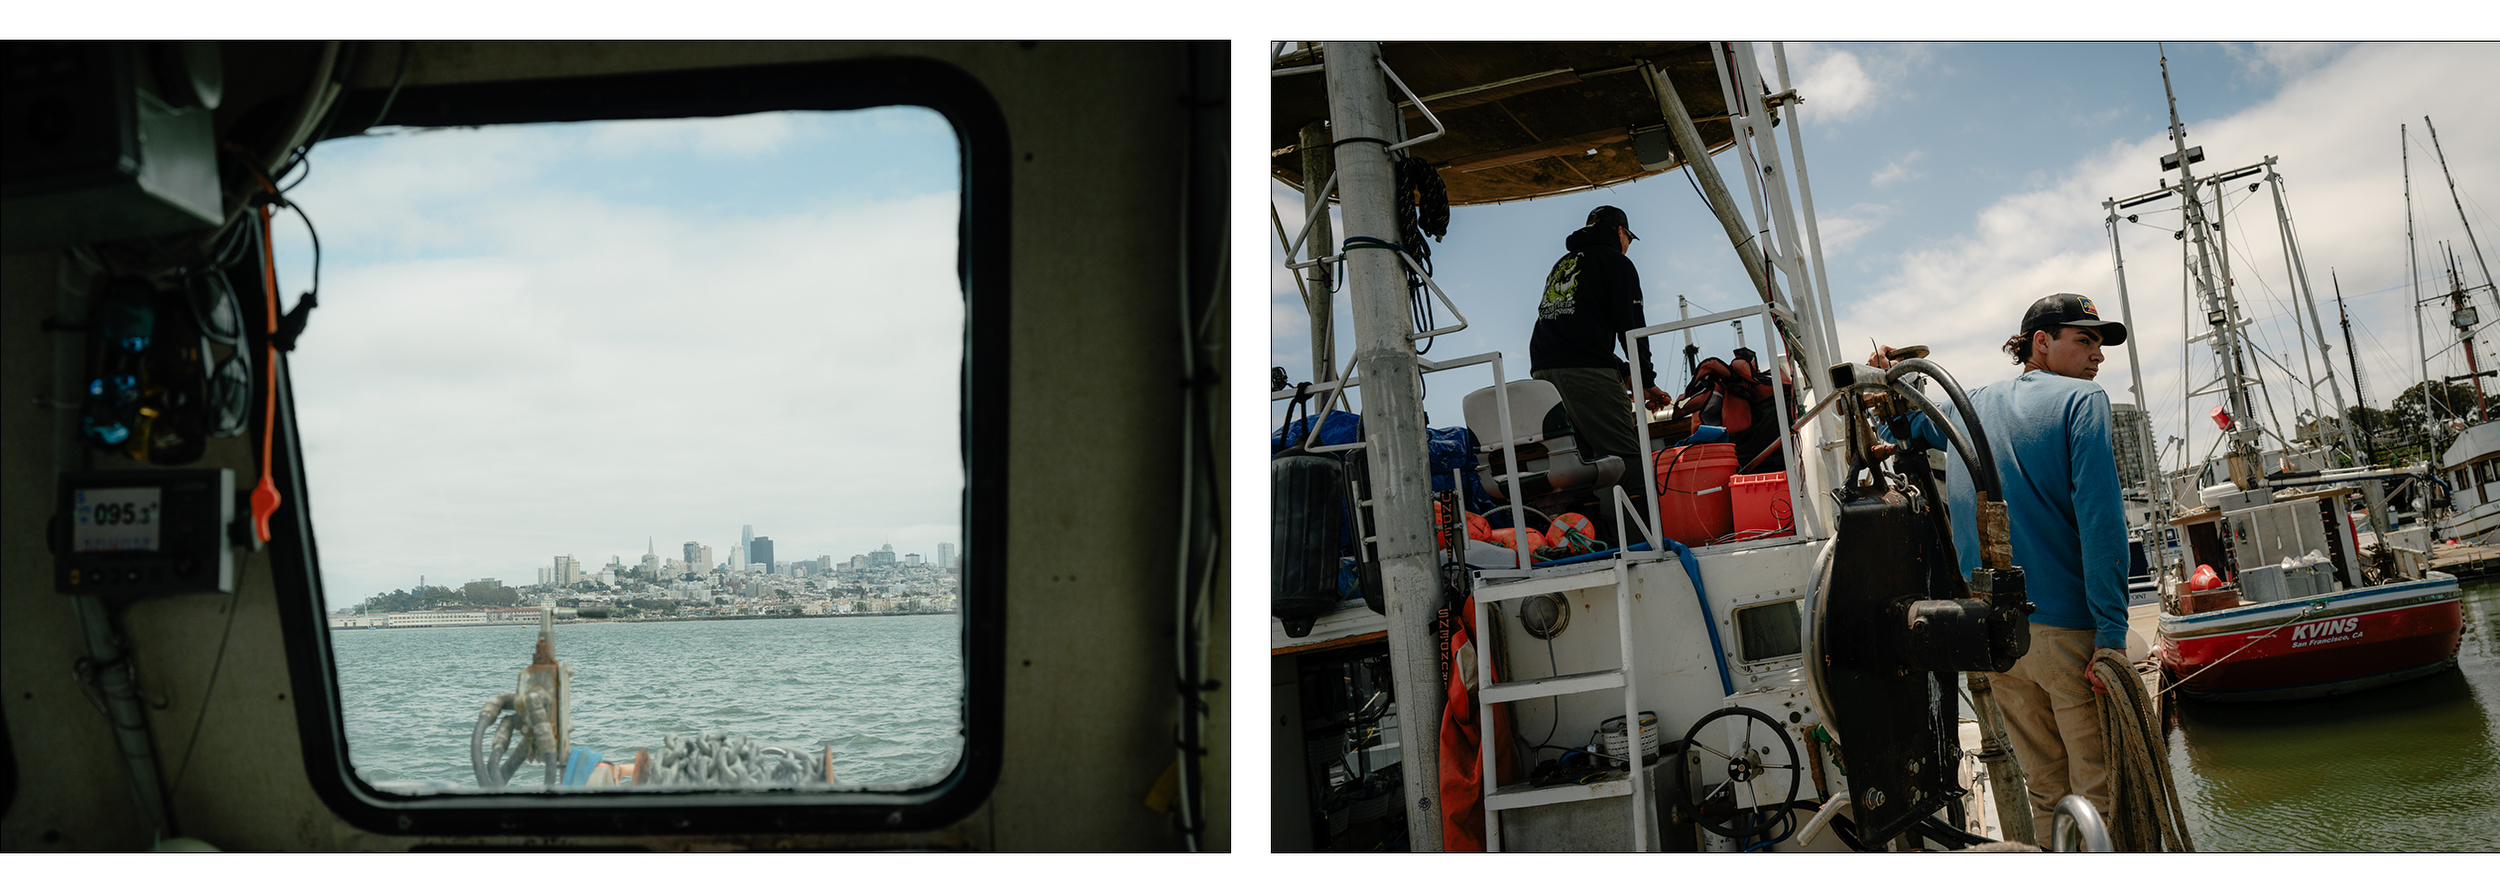 Two photos side-by-side: On the left, a view of San Francisco skyline seen through a window on a boat. On the right: two men work on a boat in a dock.